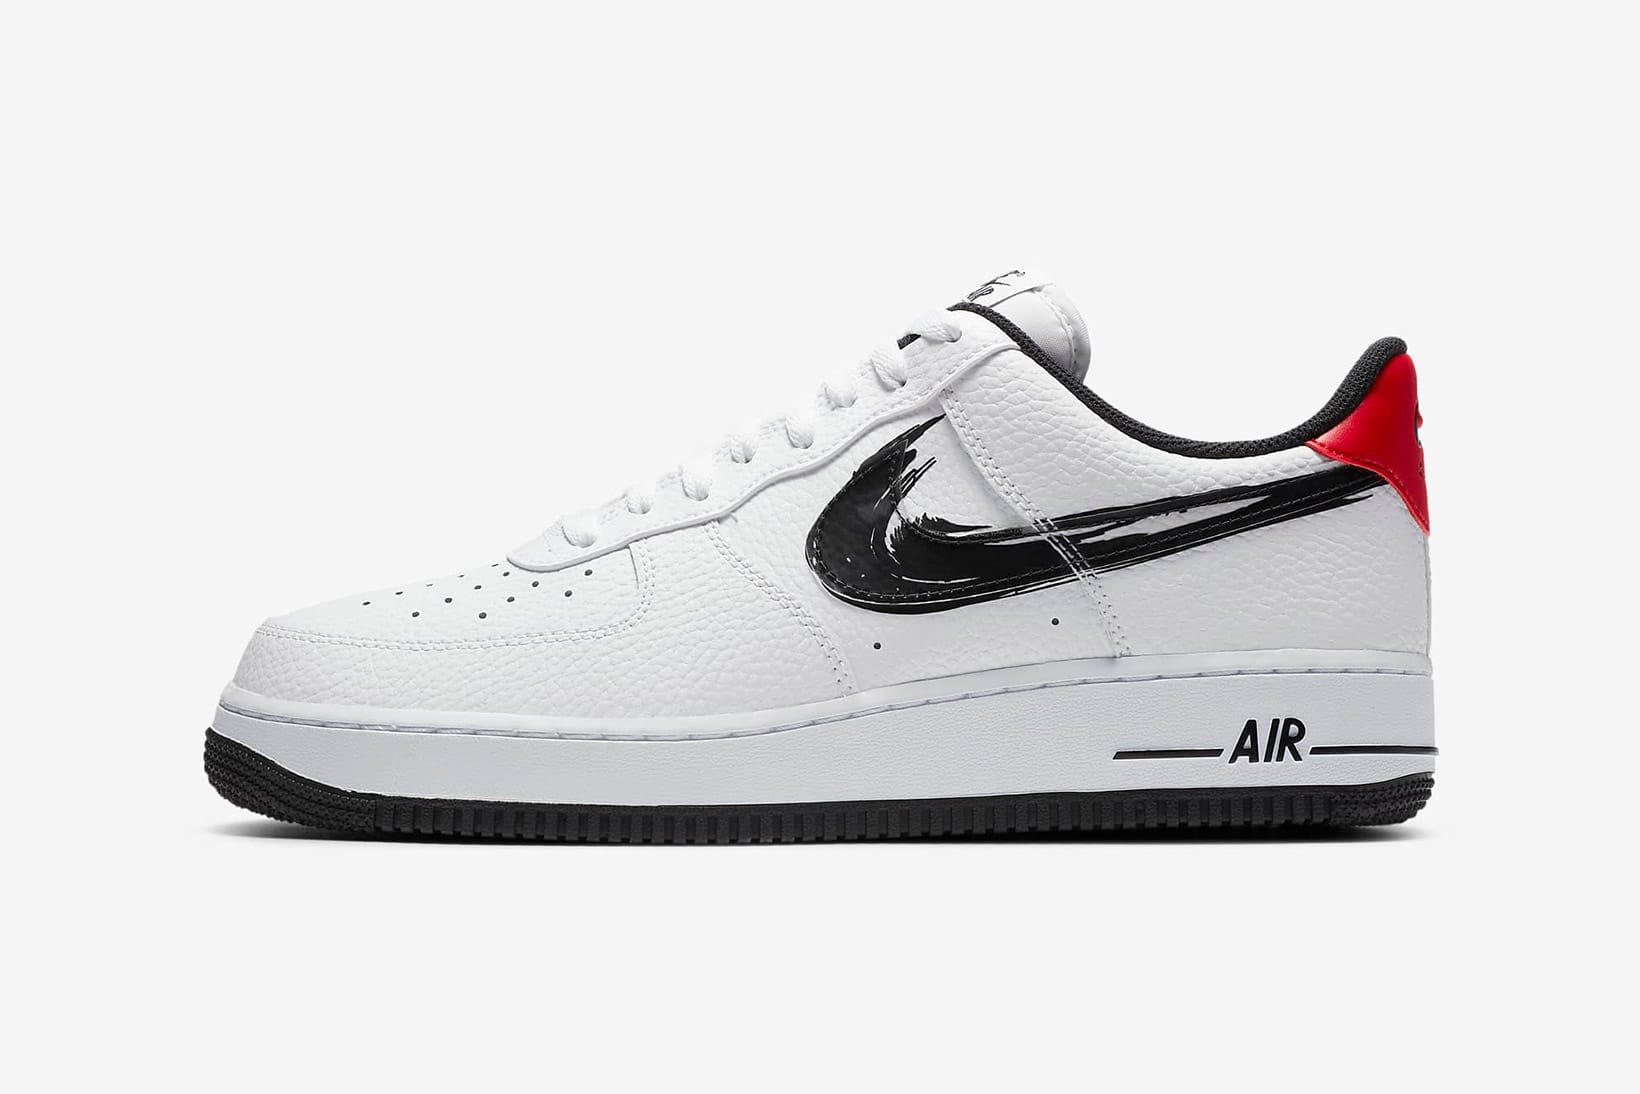 nike air force 1 07 lv8 mid